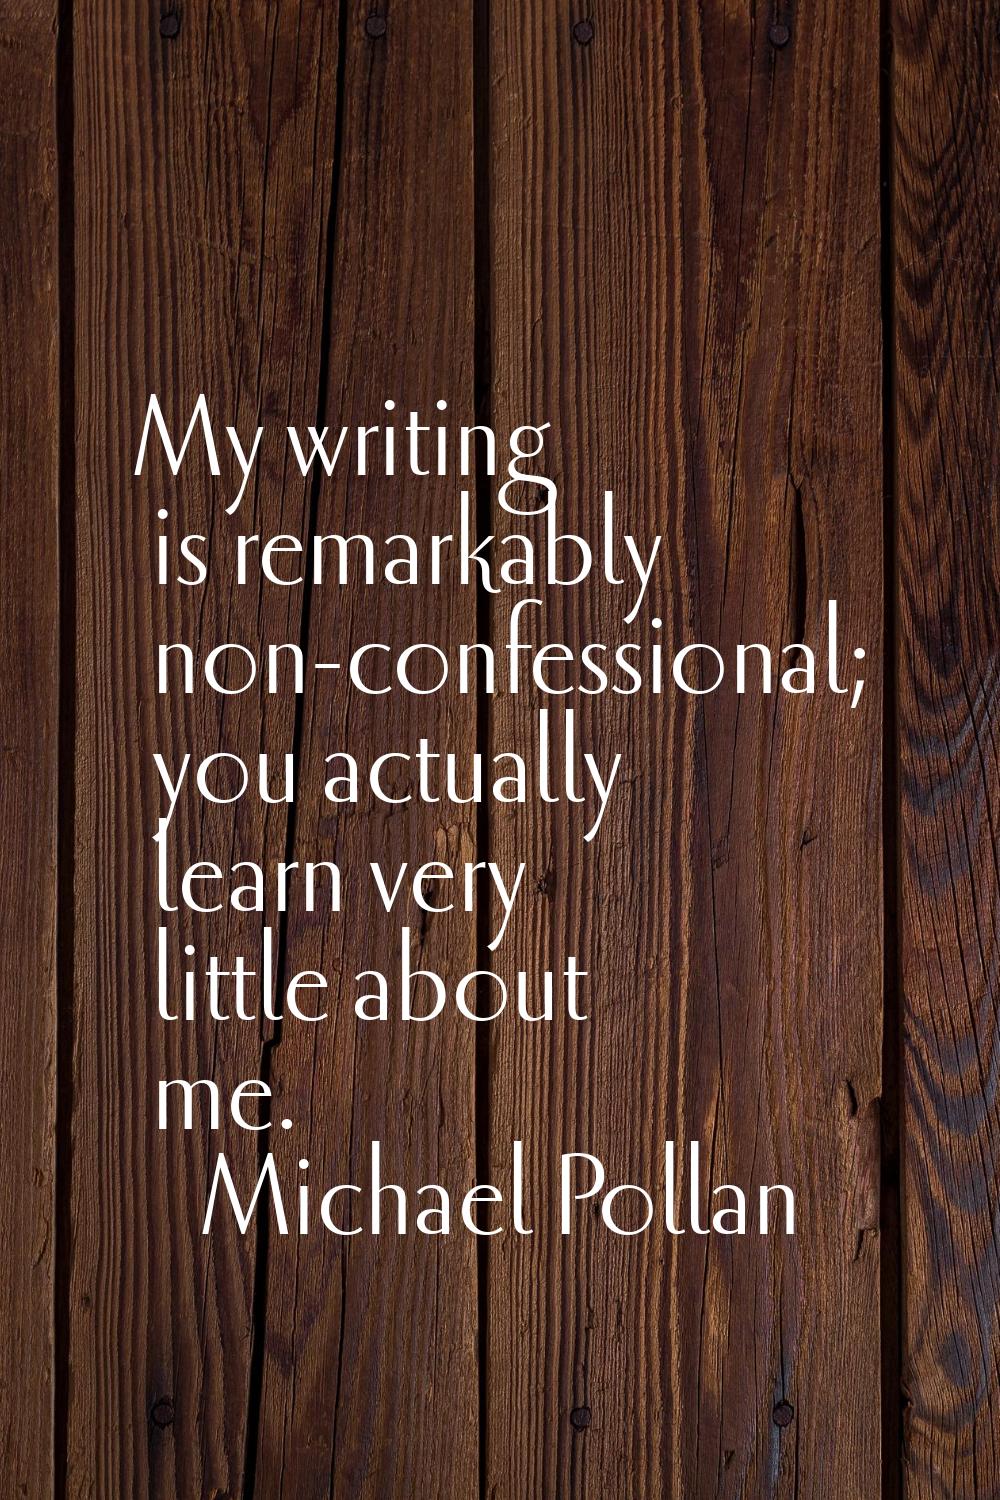 My writing is remarkably non-confessional; you actually learn very little about me.